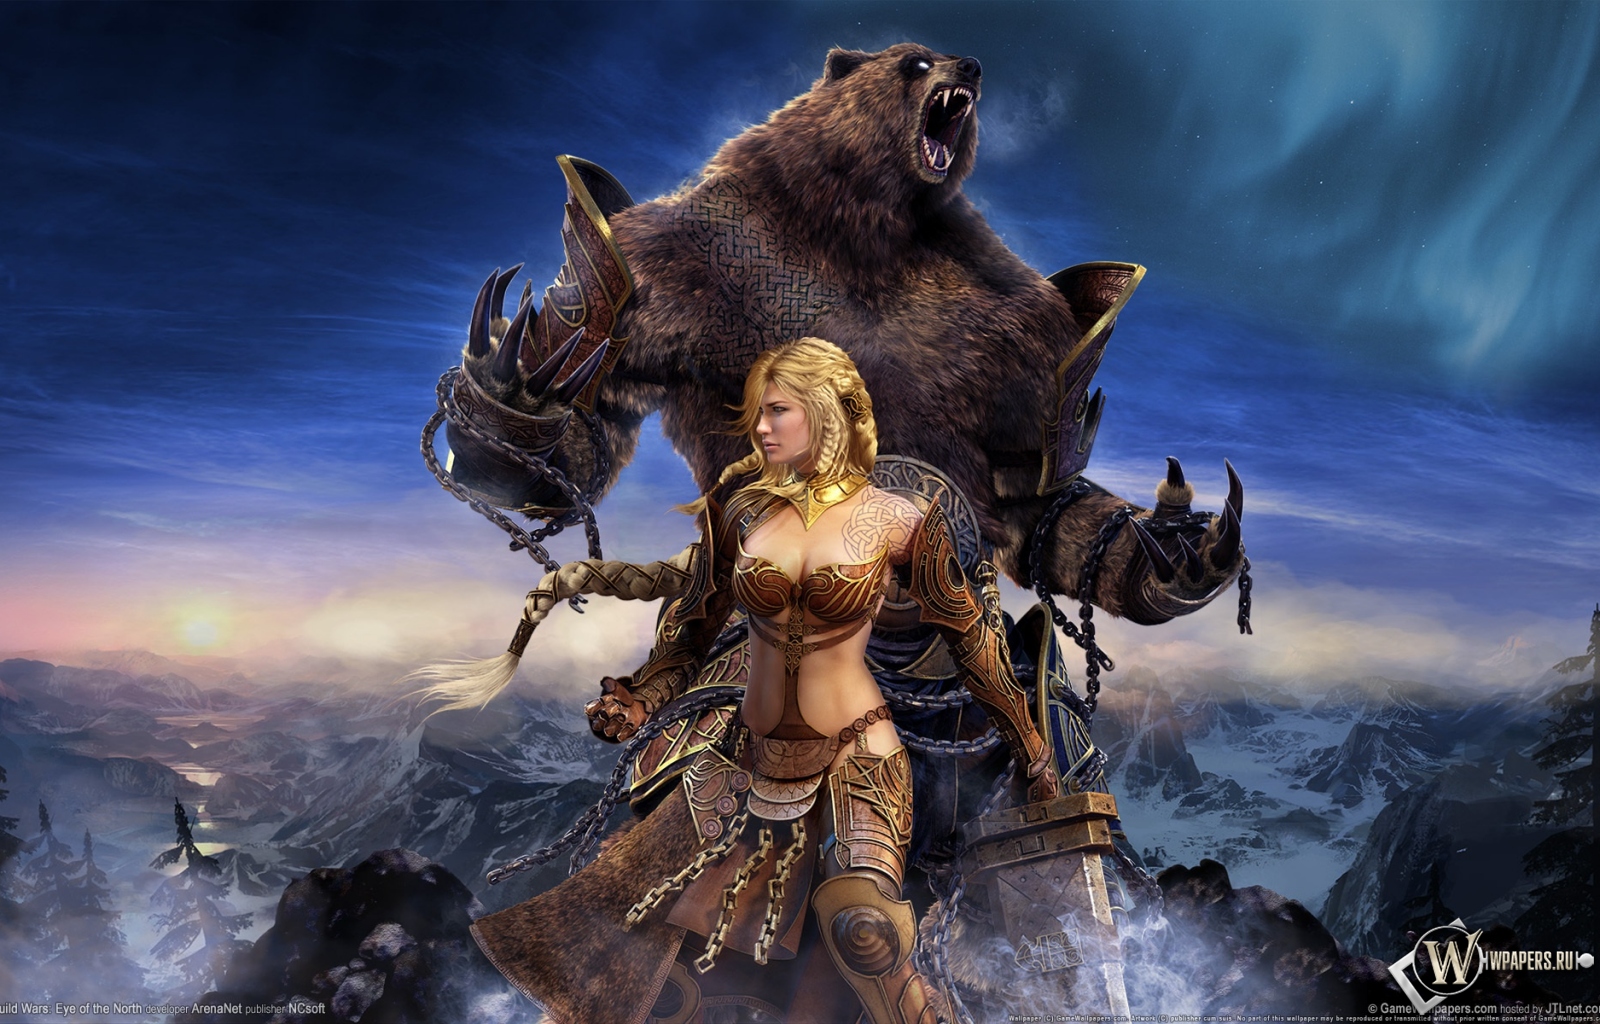 Guild wars - eye of the north 1600x1024